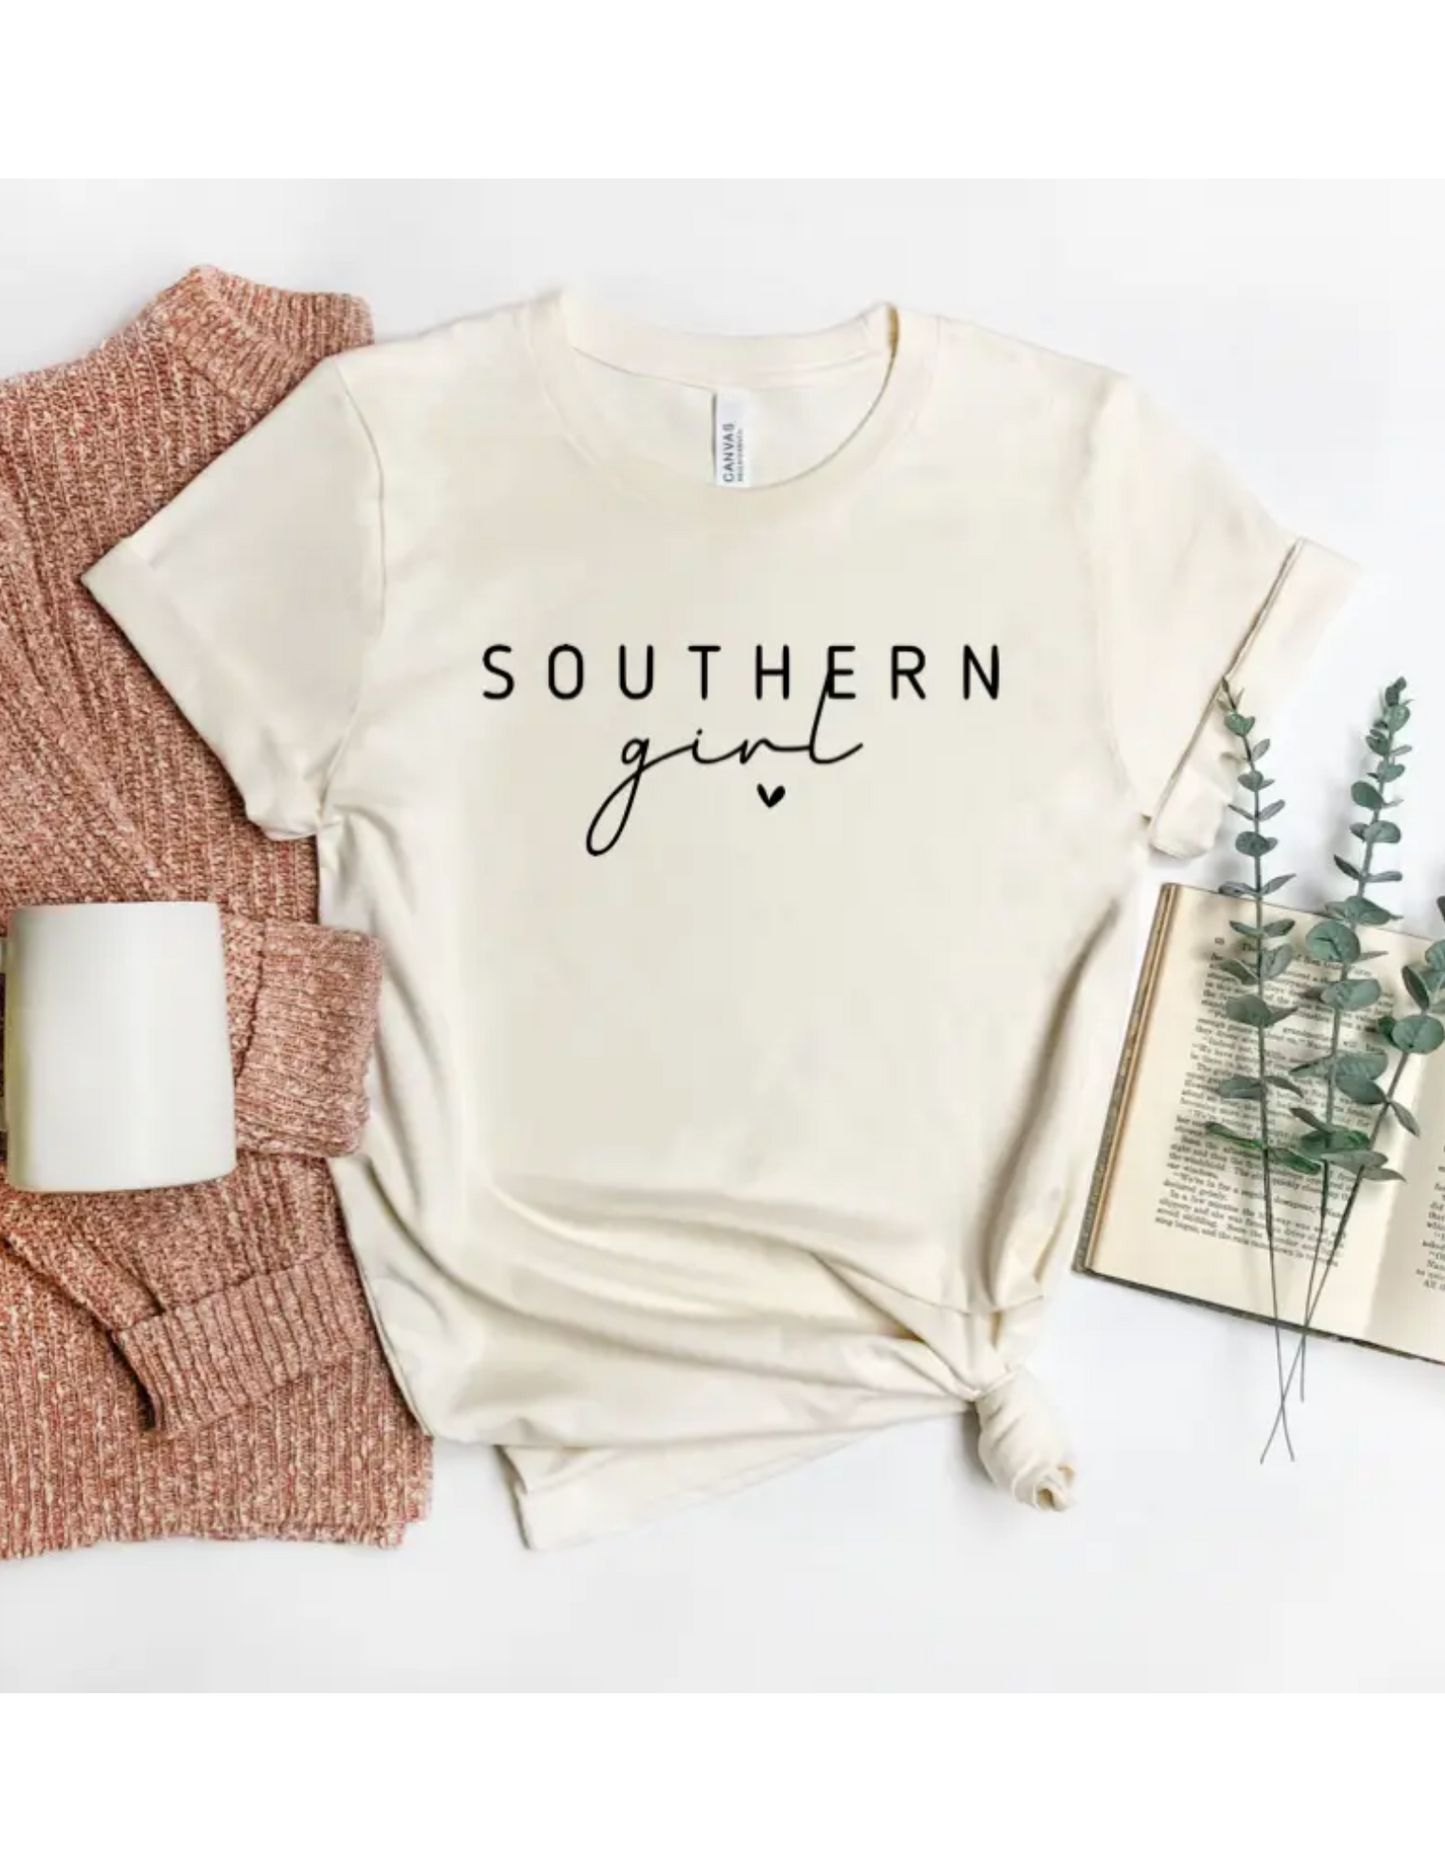 "Southern Girl" Graphic Tee